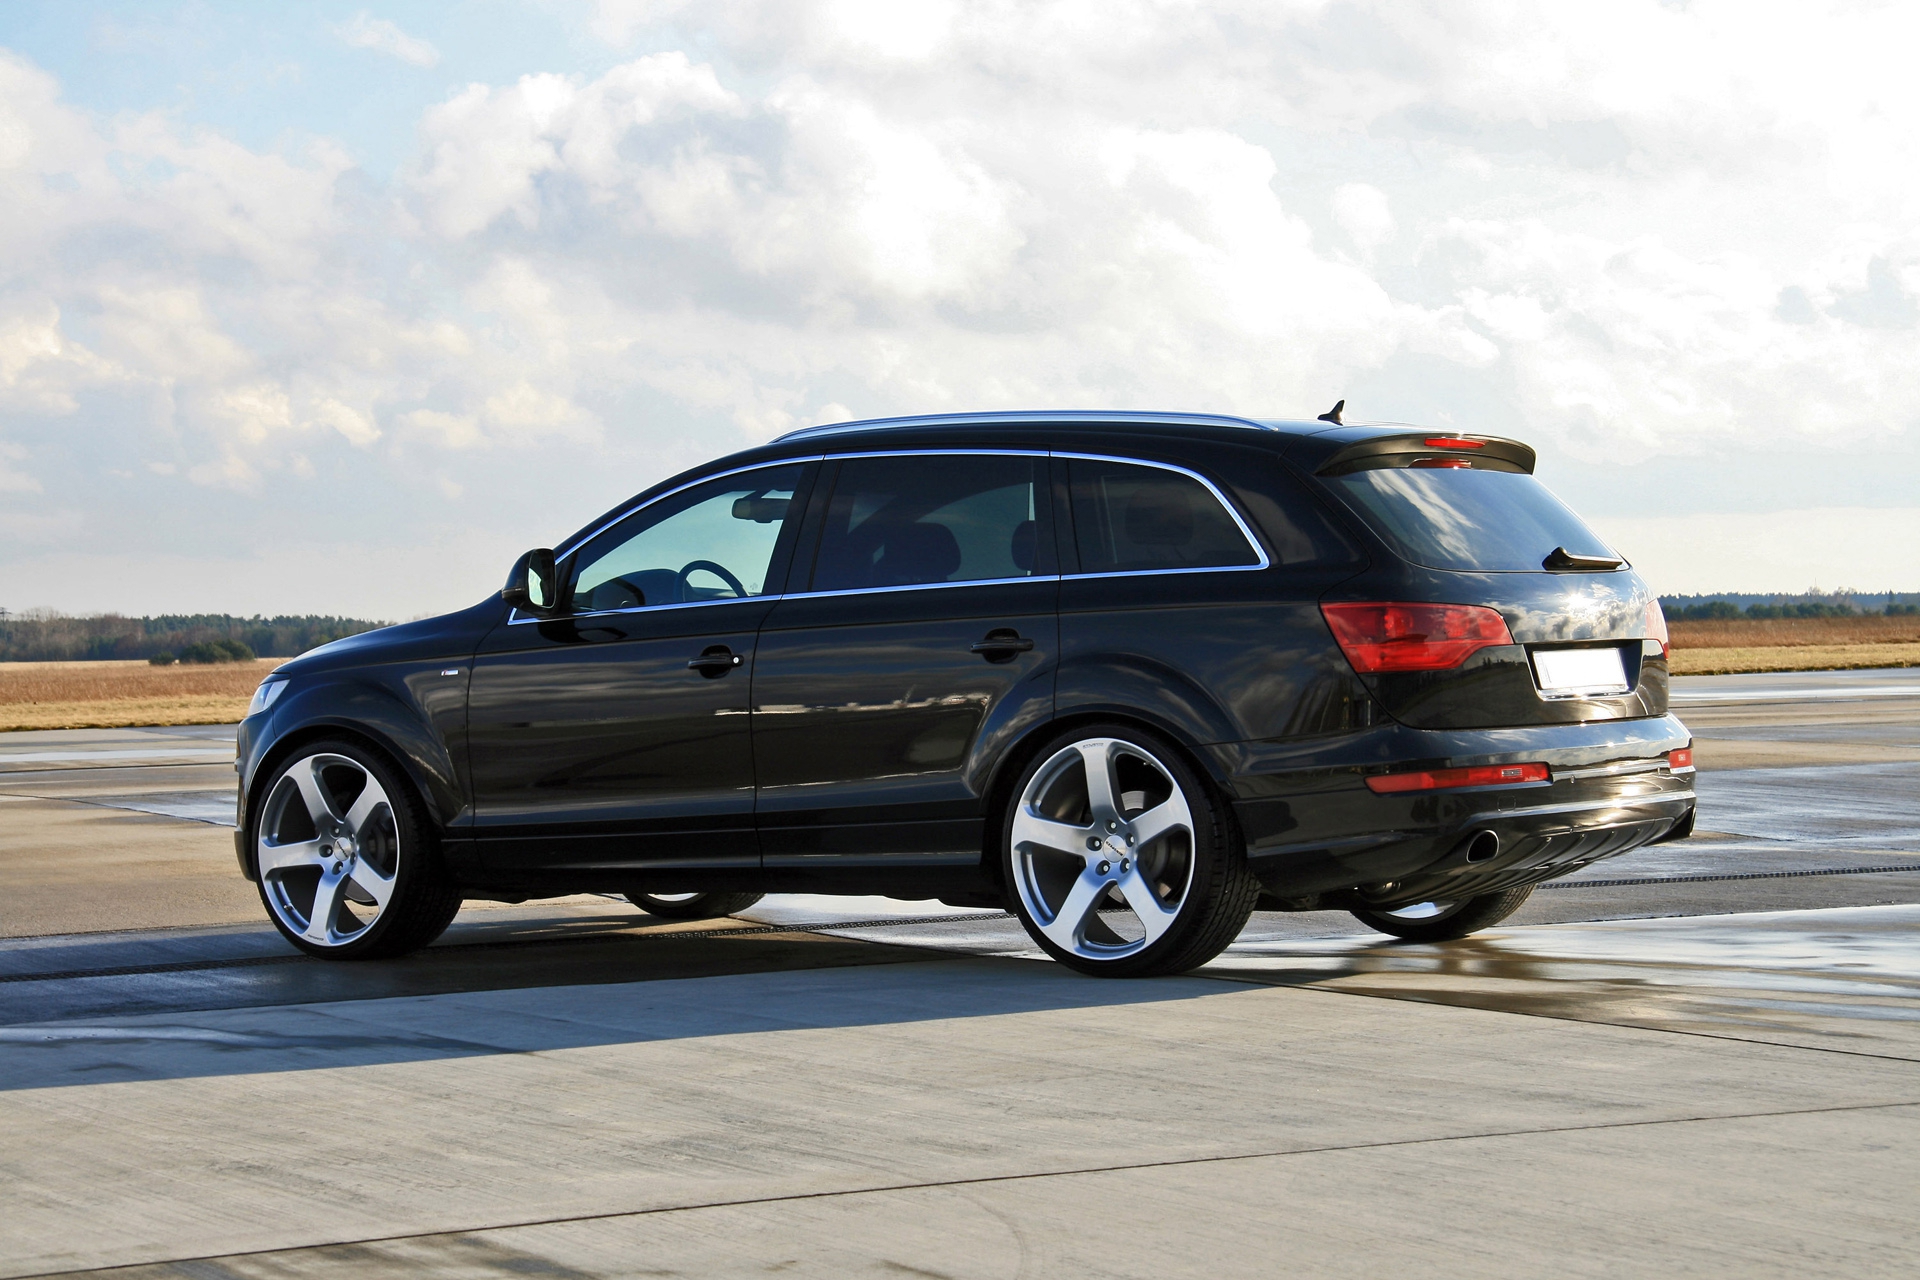 Audi Q7 Wallpapers Images Photos Pictures Backgrounds